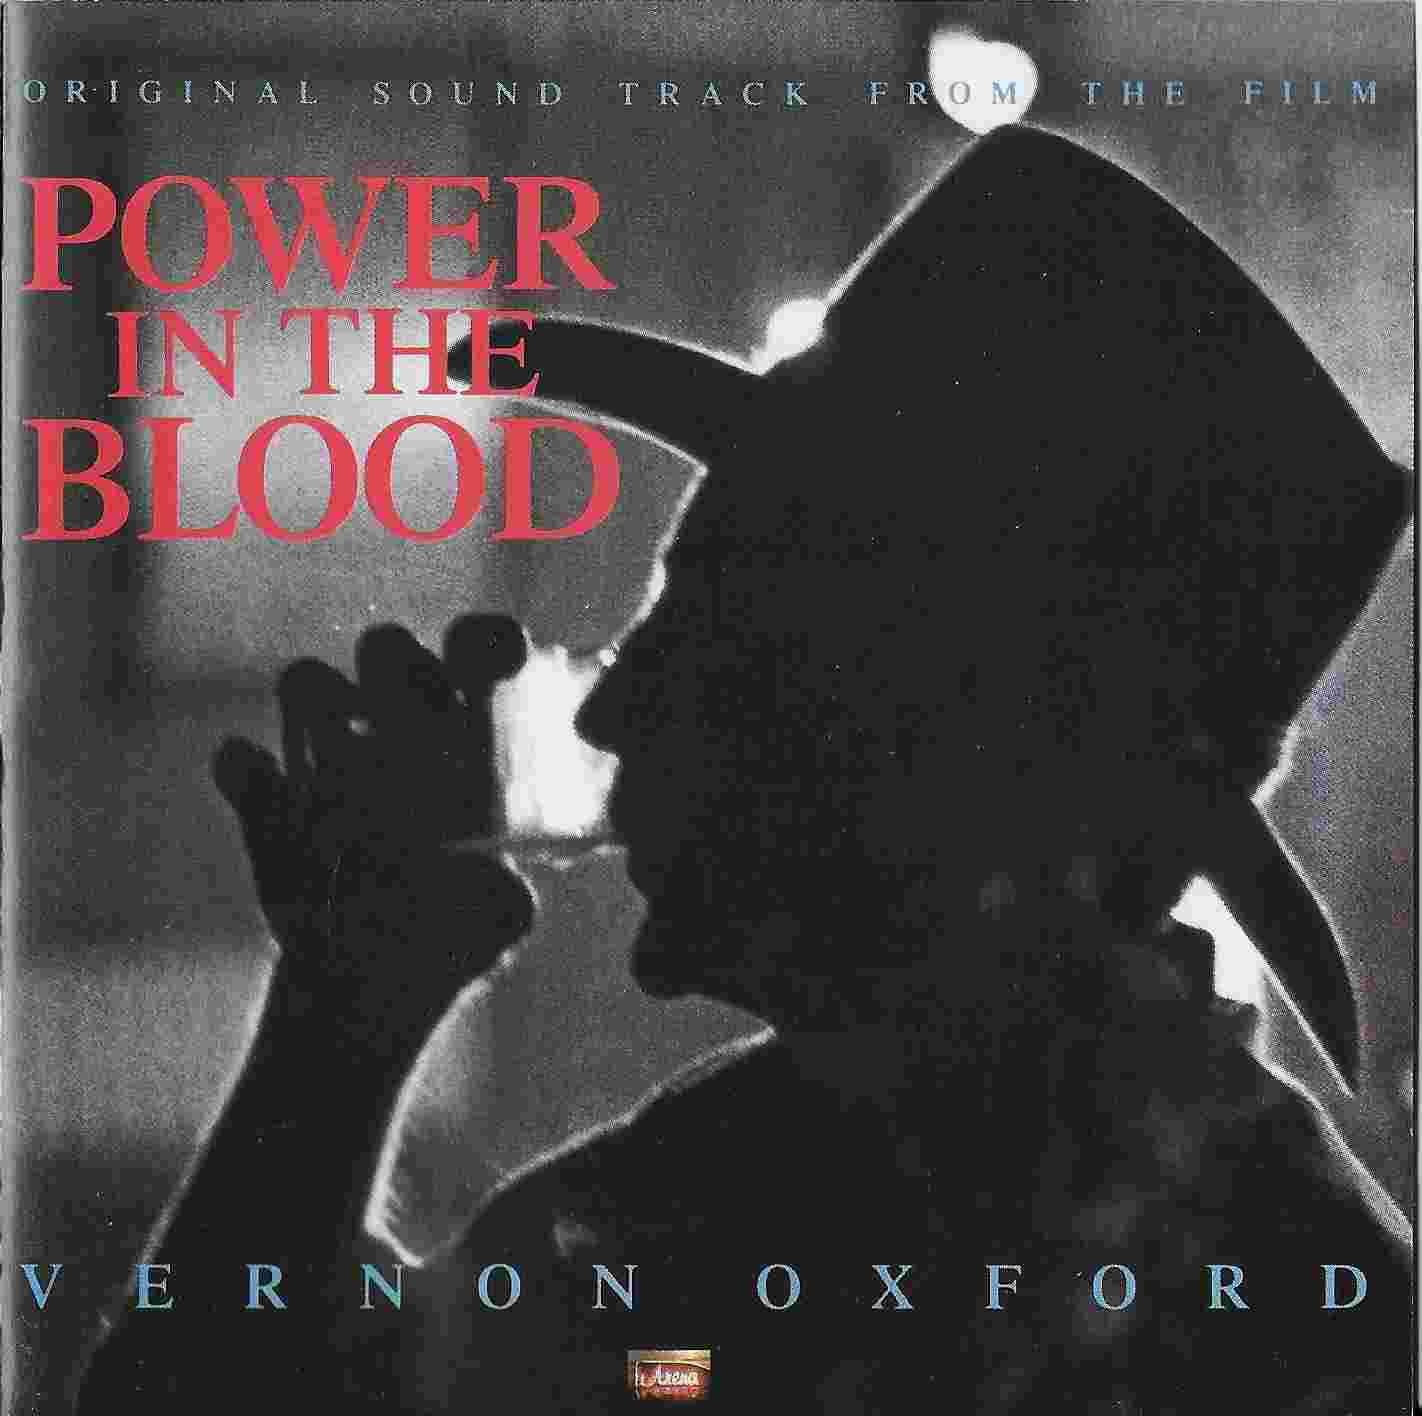 Picture of BBCCD729 Power in the blood by artist Vernon Oxford from the BBC cds - Records and Tapes library